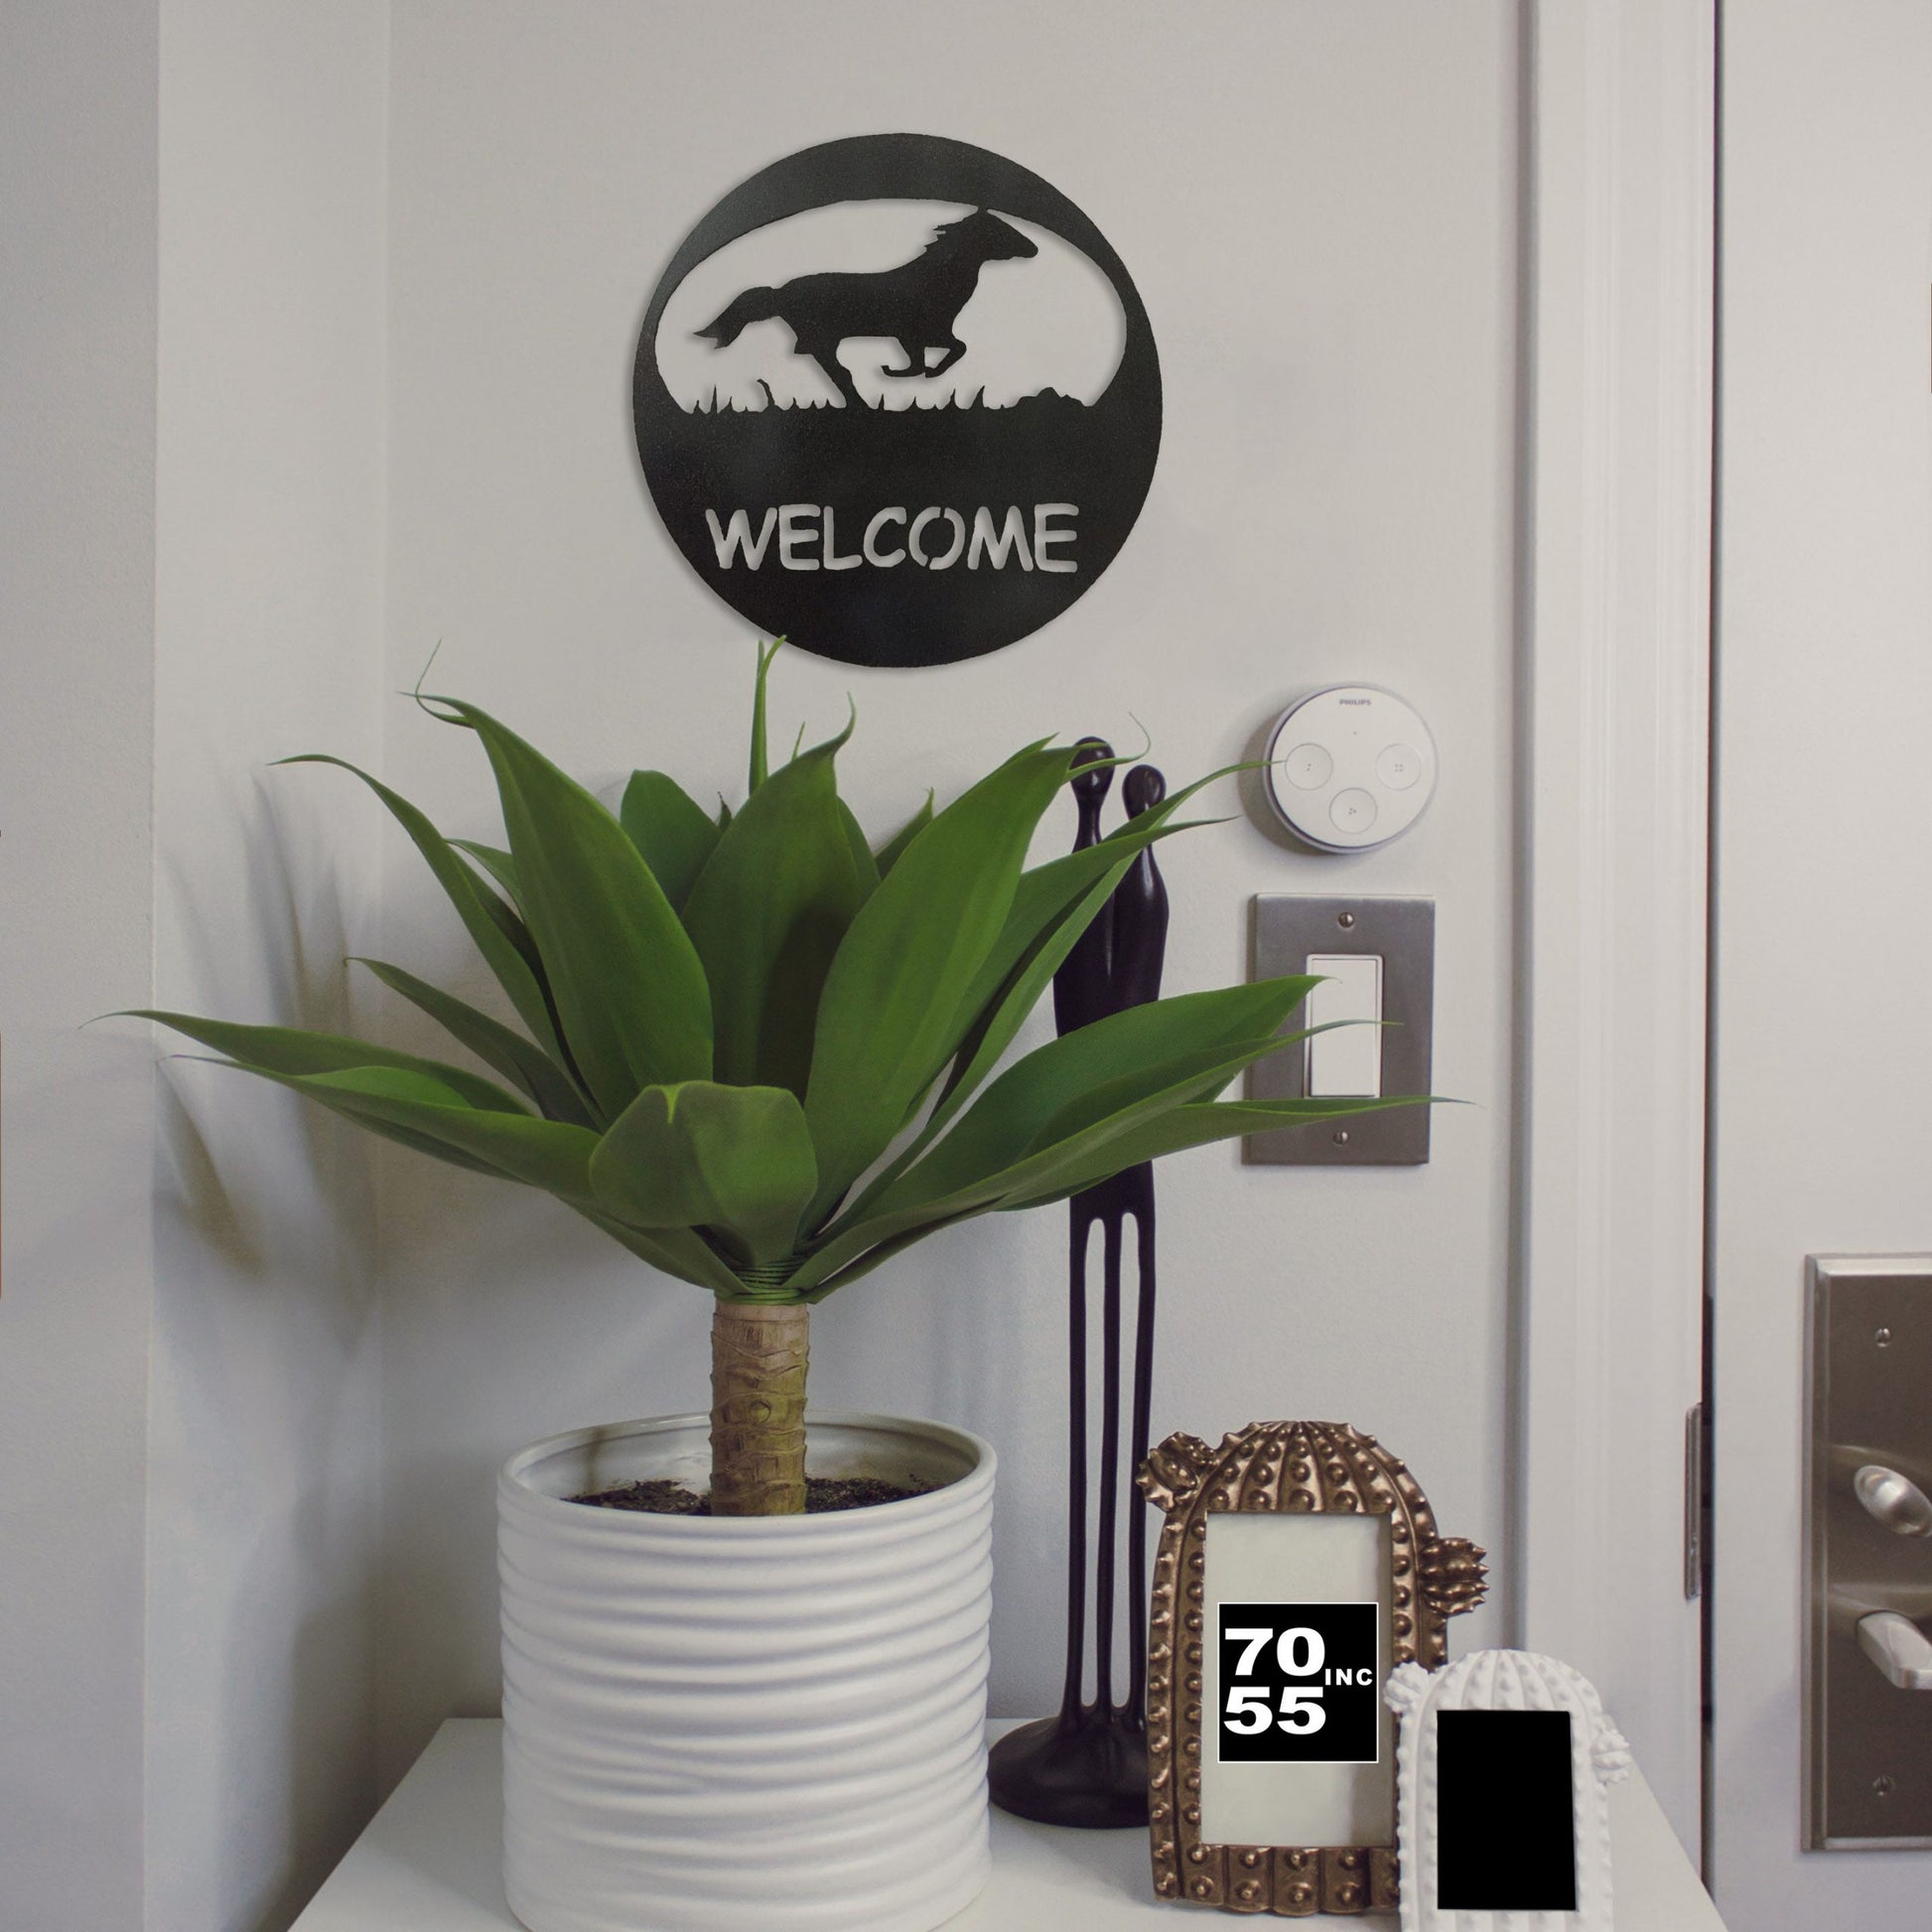 black-horse-welcome-circle-by-door-scaled-1